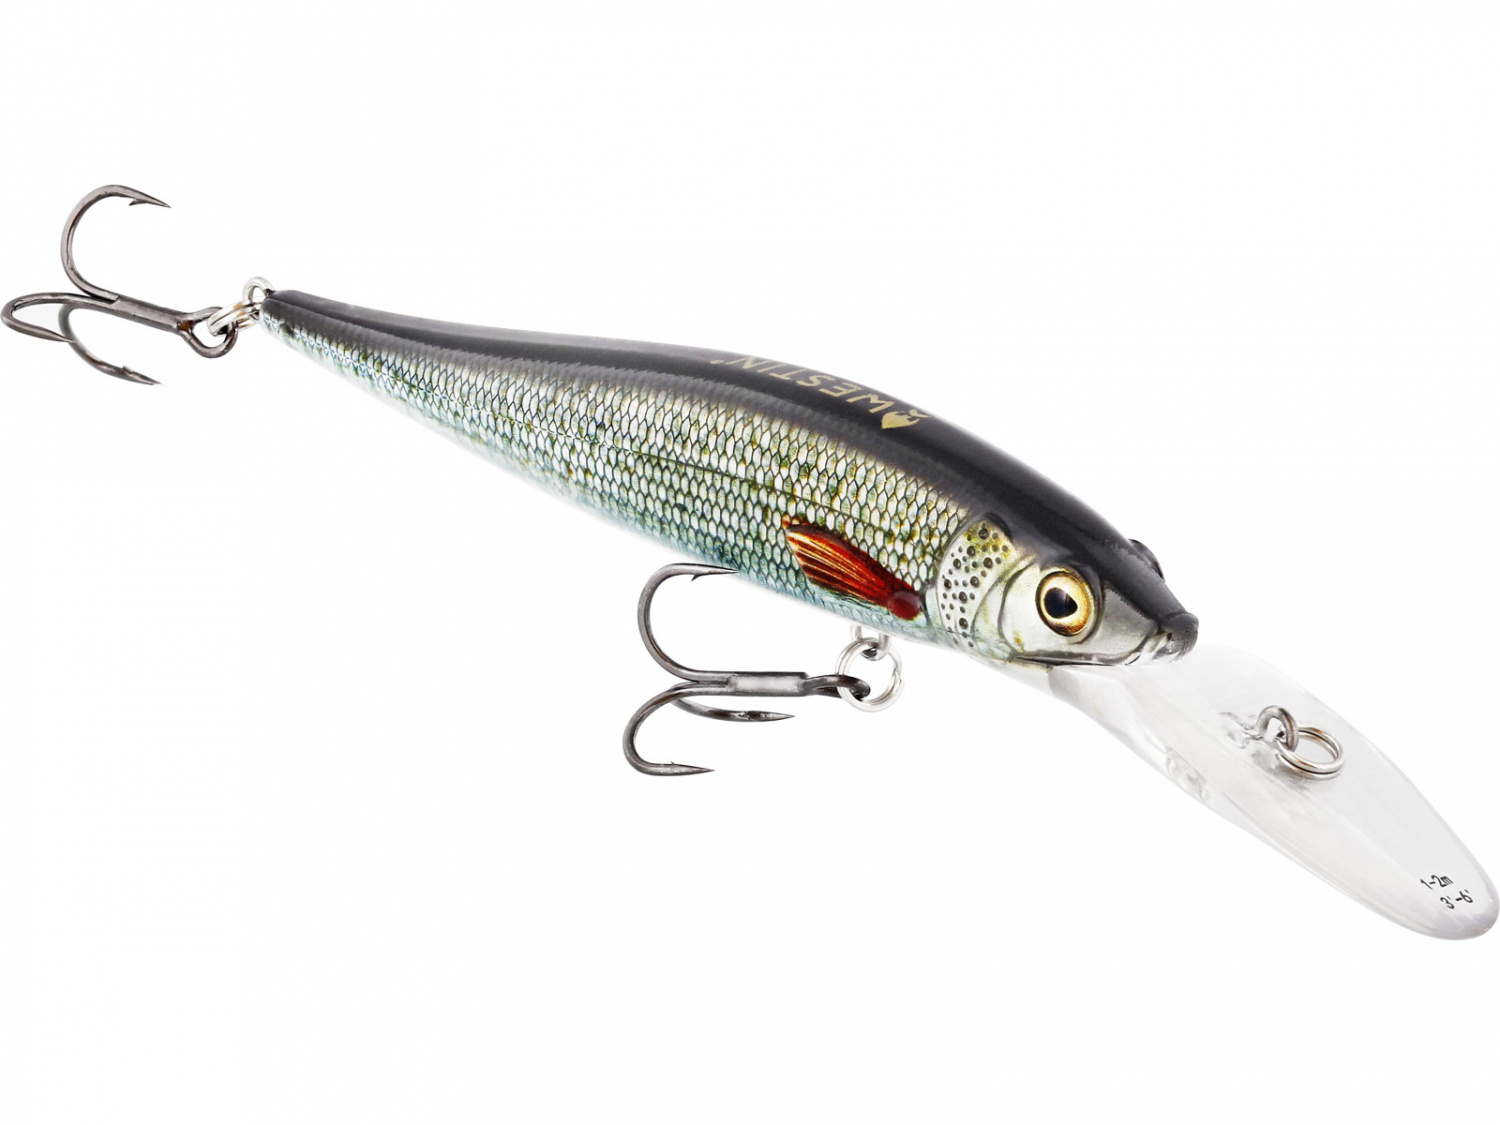  Bomber Lures Jointed Long Slender Minnow Jerbait